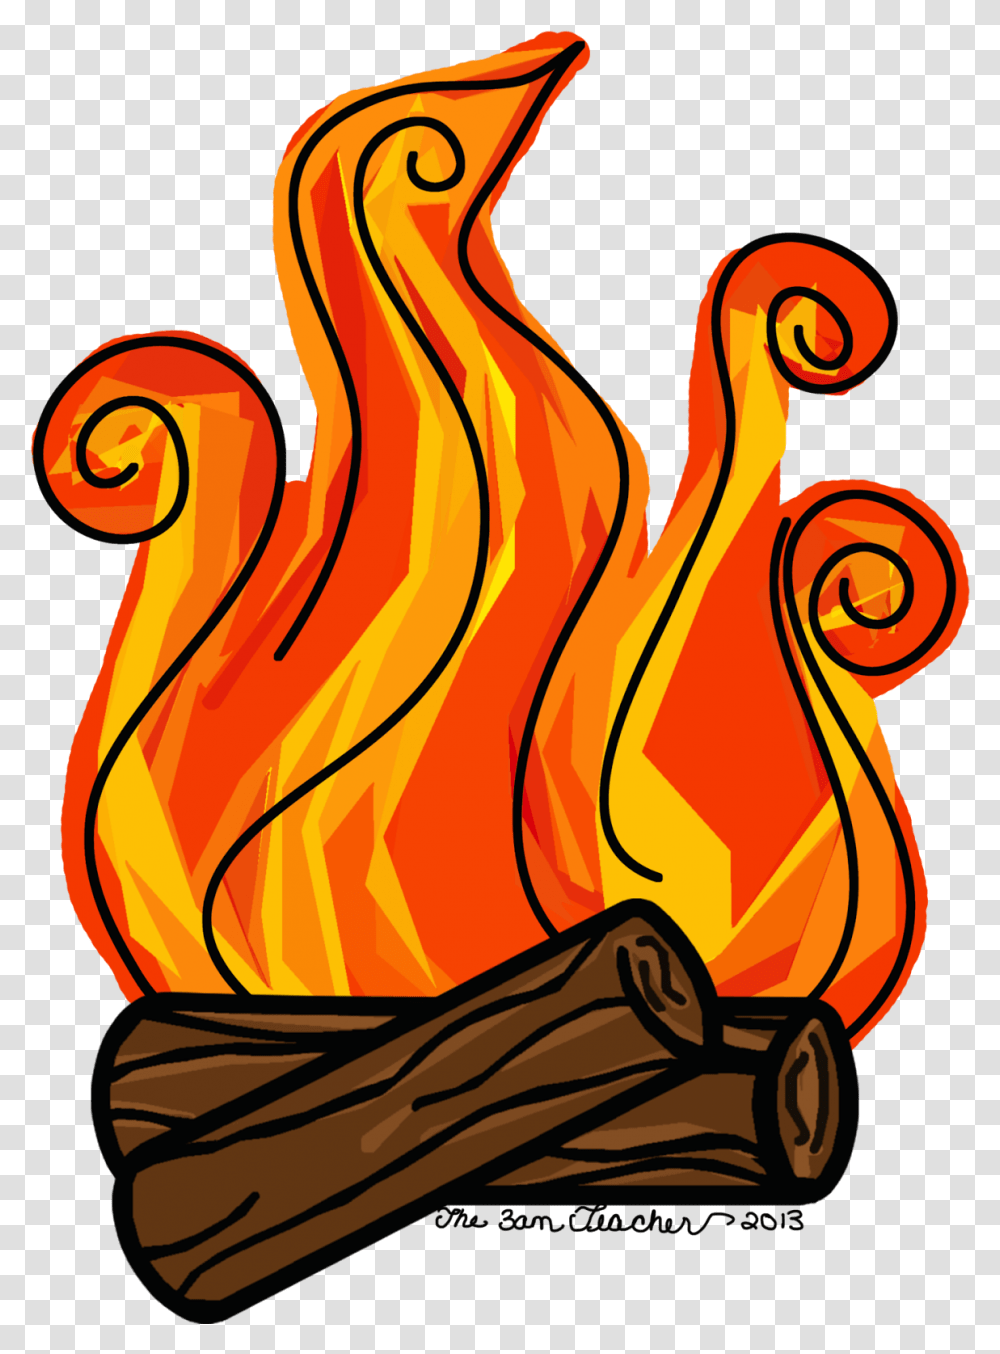 Campfire Clipart Fireplace Fire Fire In Fireplace Clip Art Clip Art Fireplace Flames, Bonfire Transparent Png